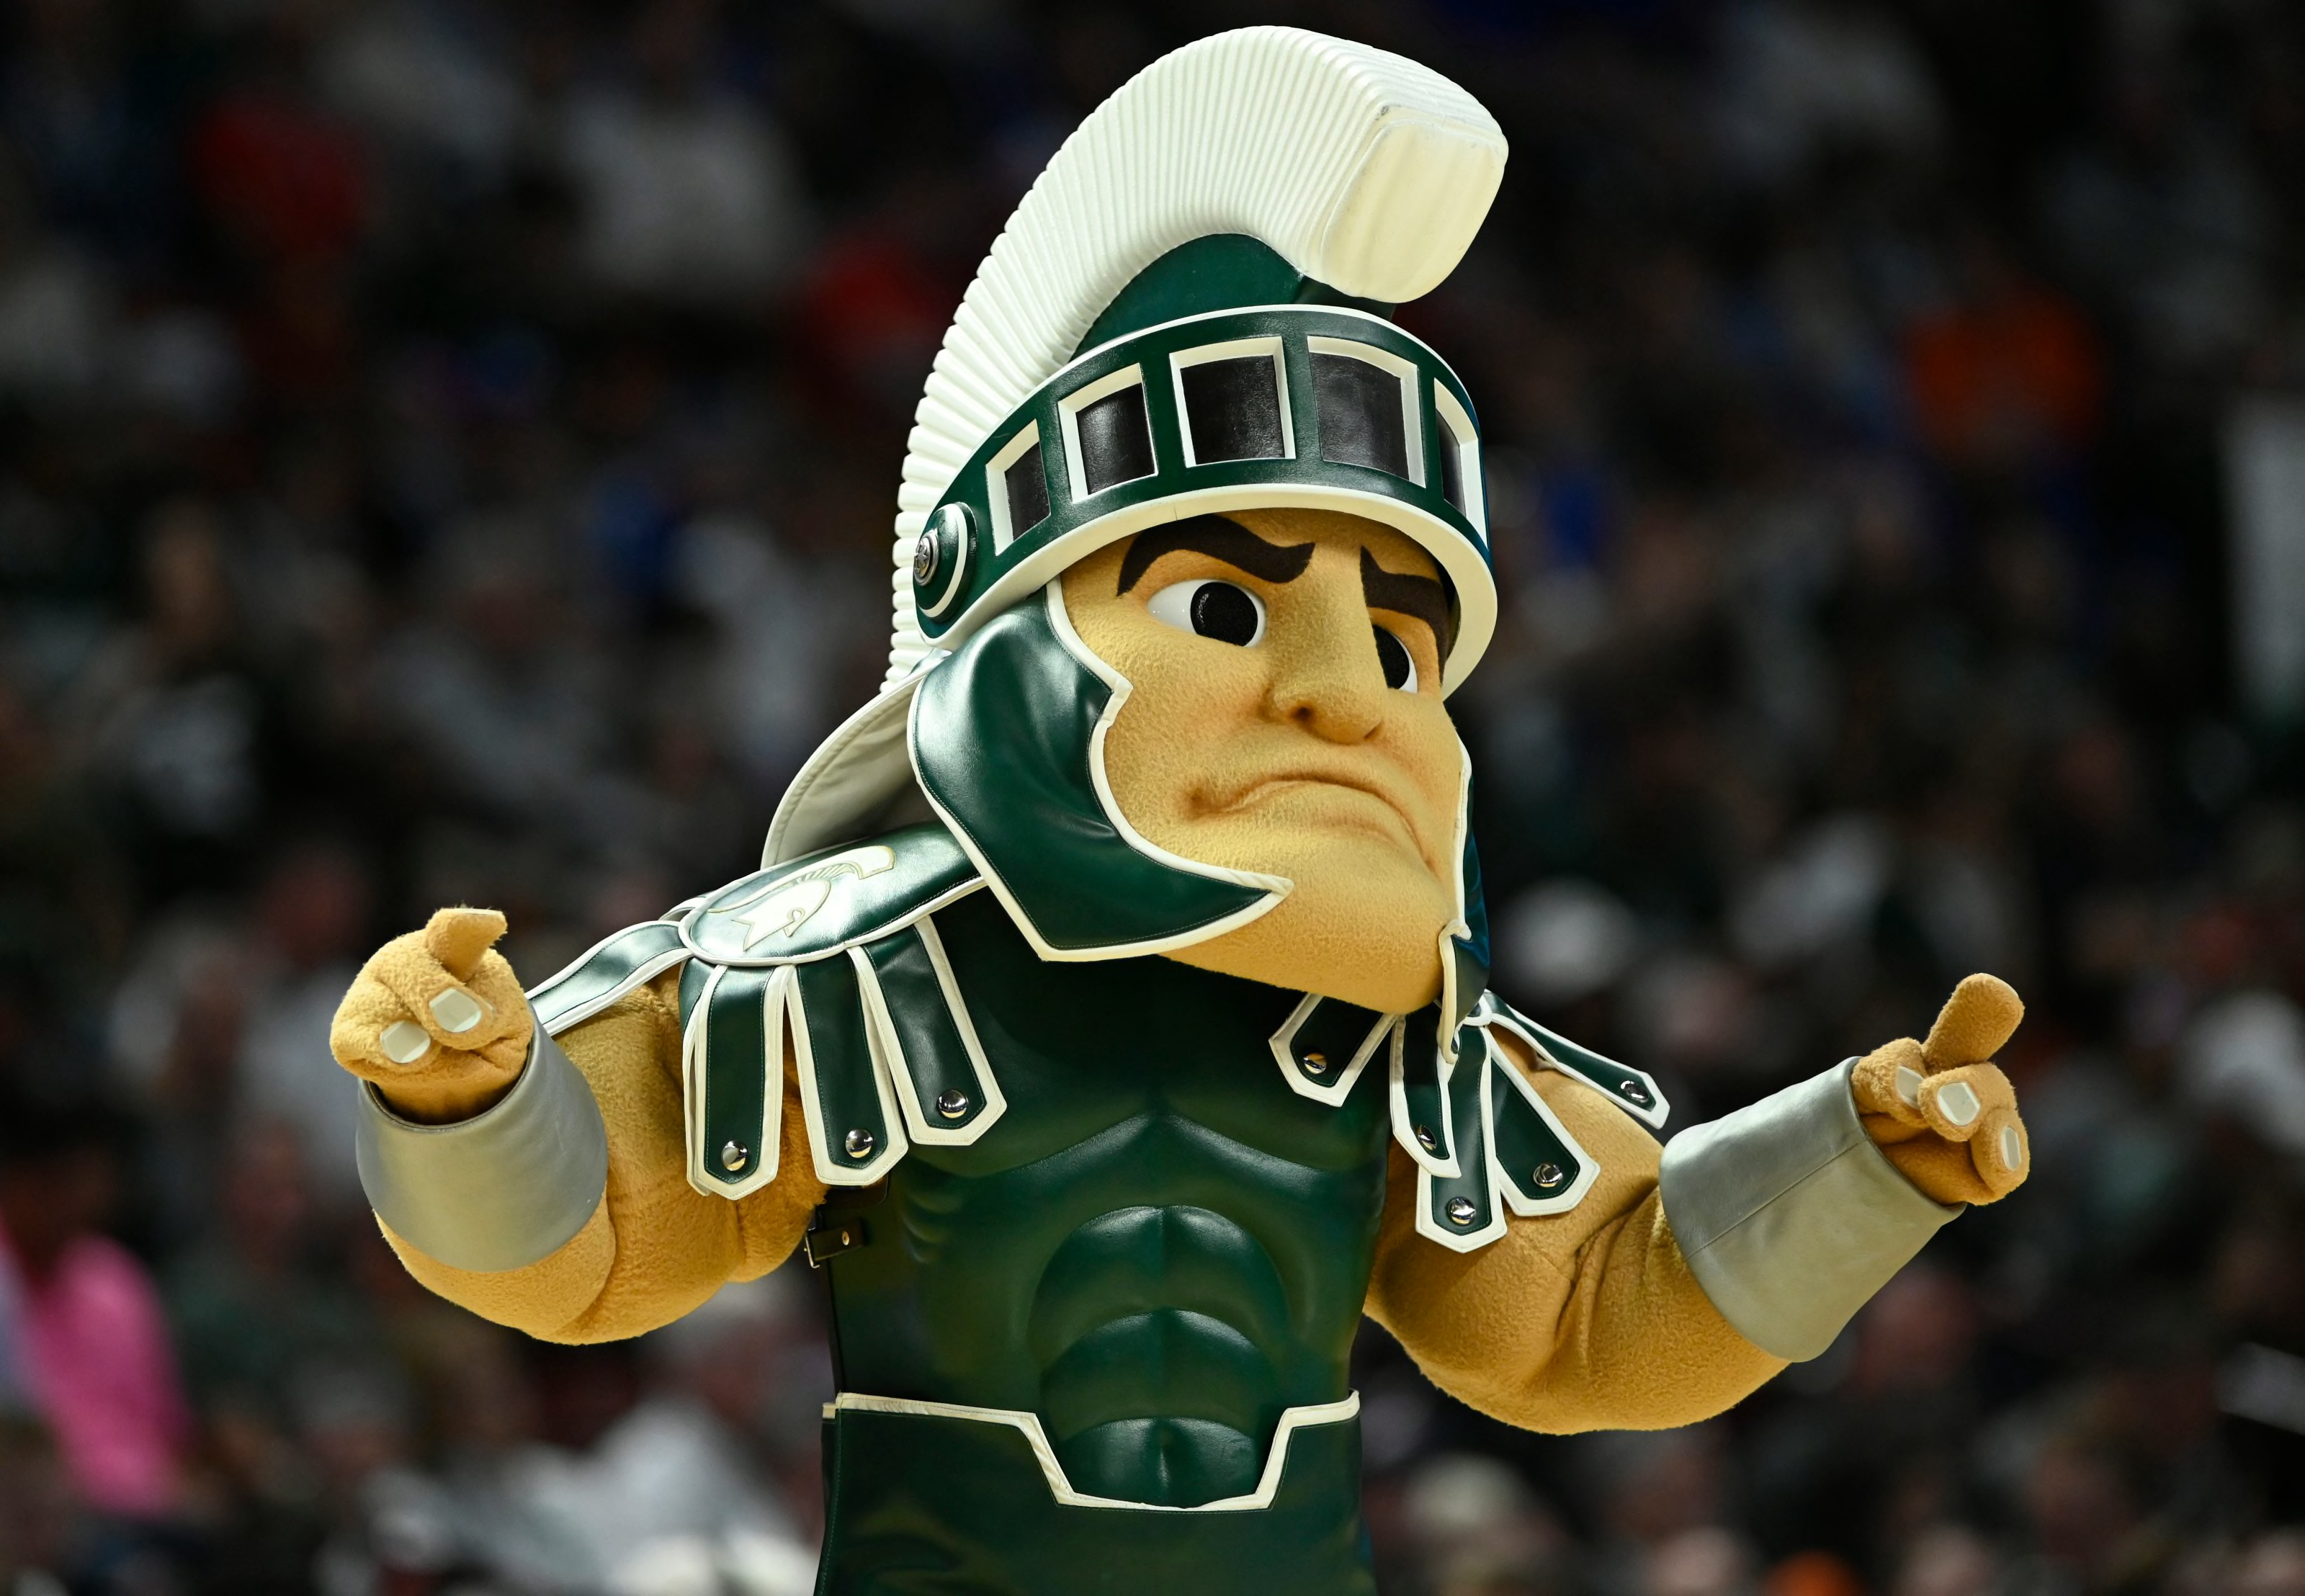 Michigan State Basketball What is known of 202324 schedule so far?